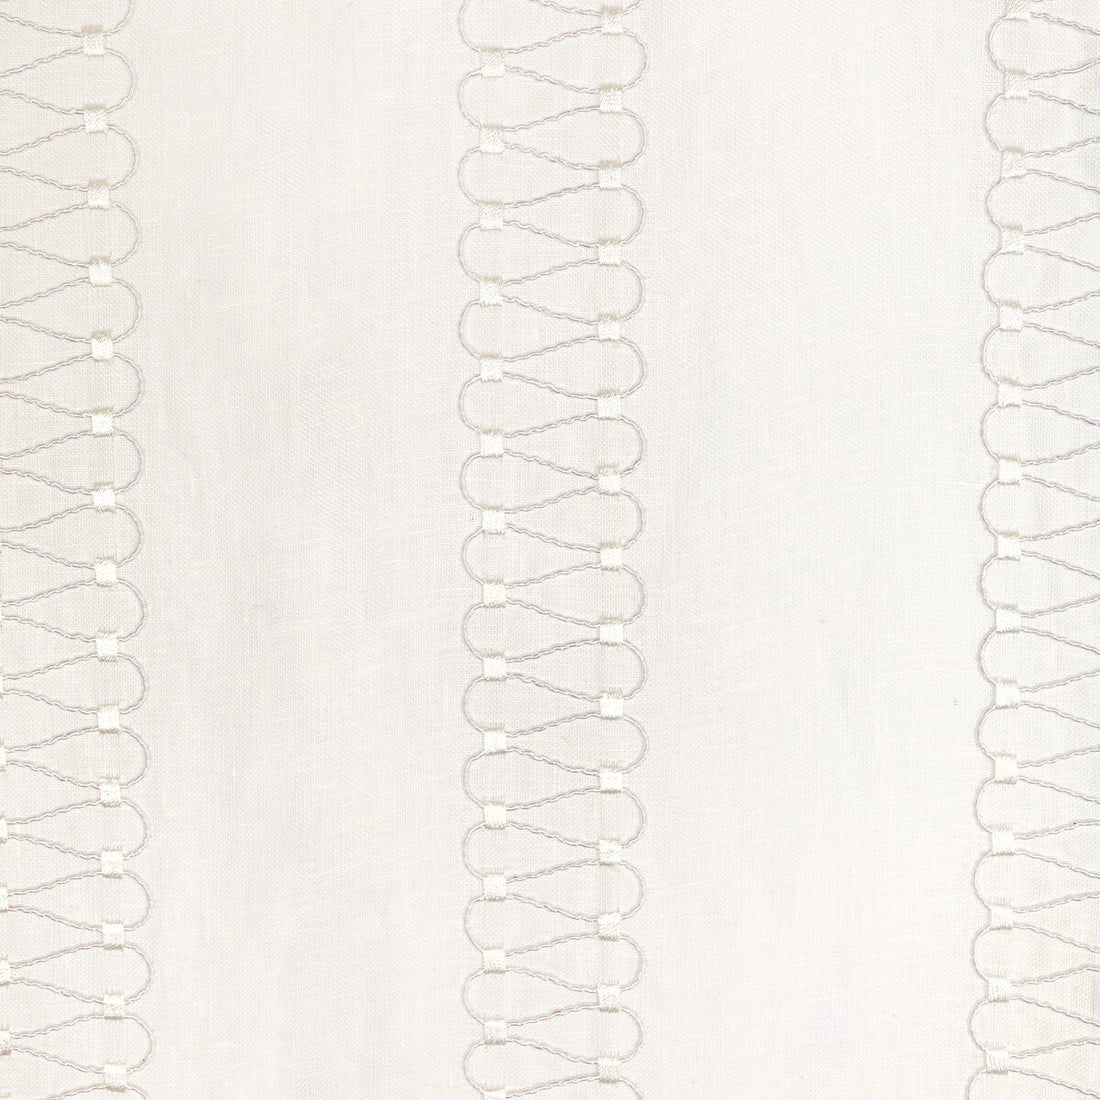 Alston Sheer fabric in ivory color - pattern 2021126.1.0 - by Lee Jofa in the Summerland collection